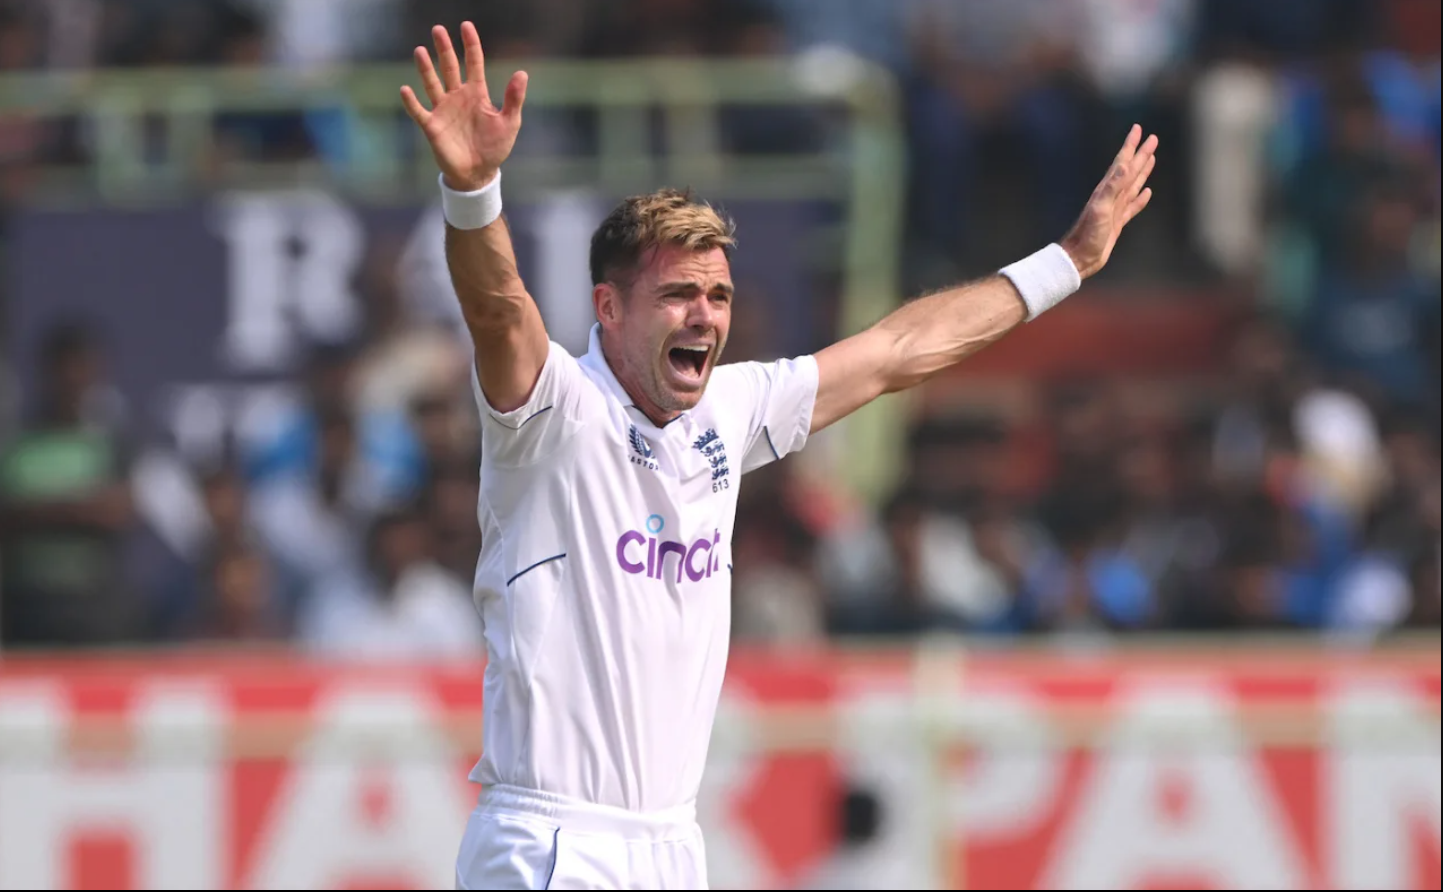 IND vs ENG: James Anderson Becomes First Pacer To Pick 700 Test Wickets